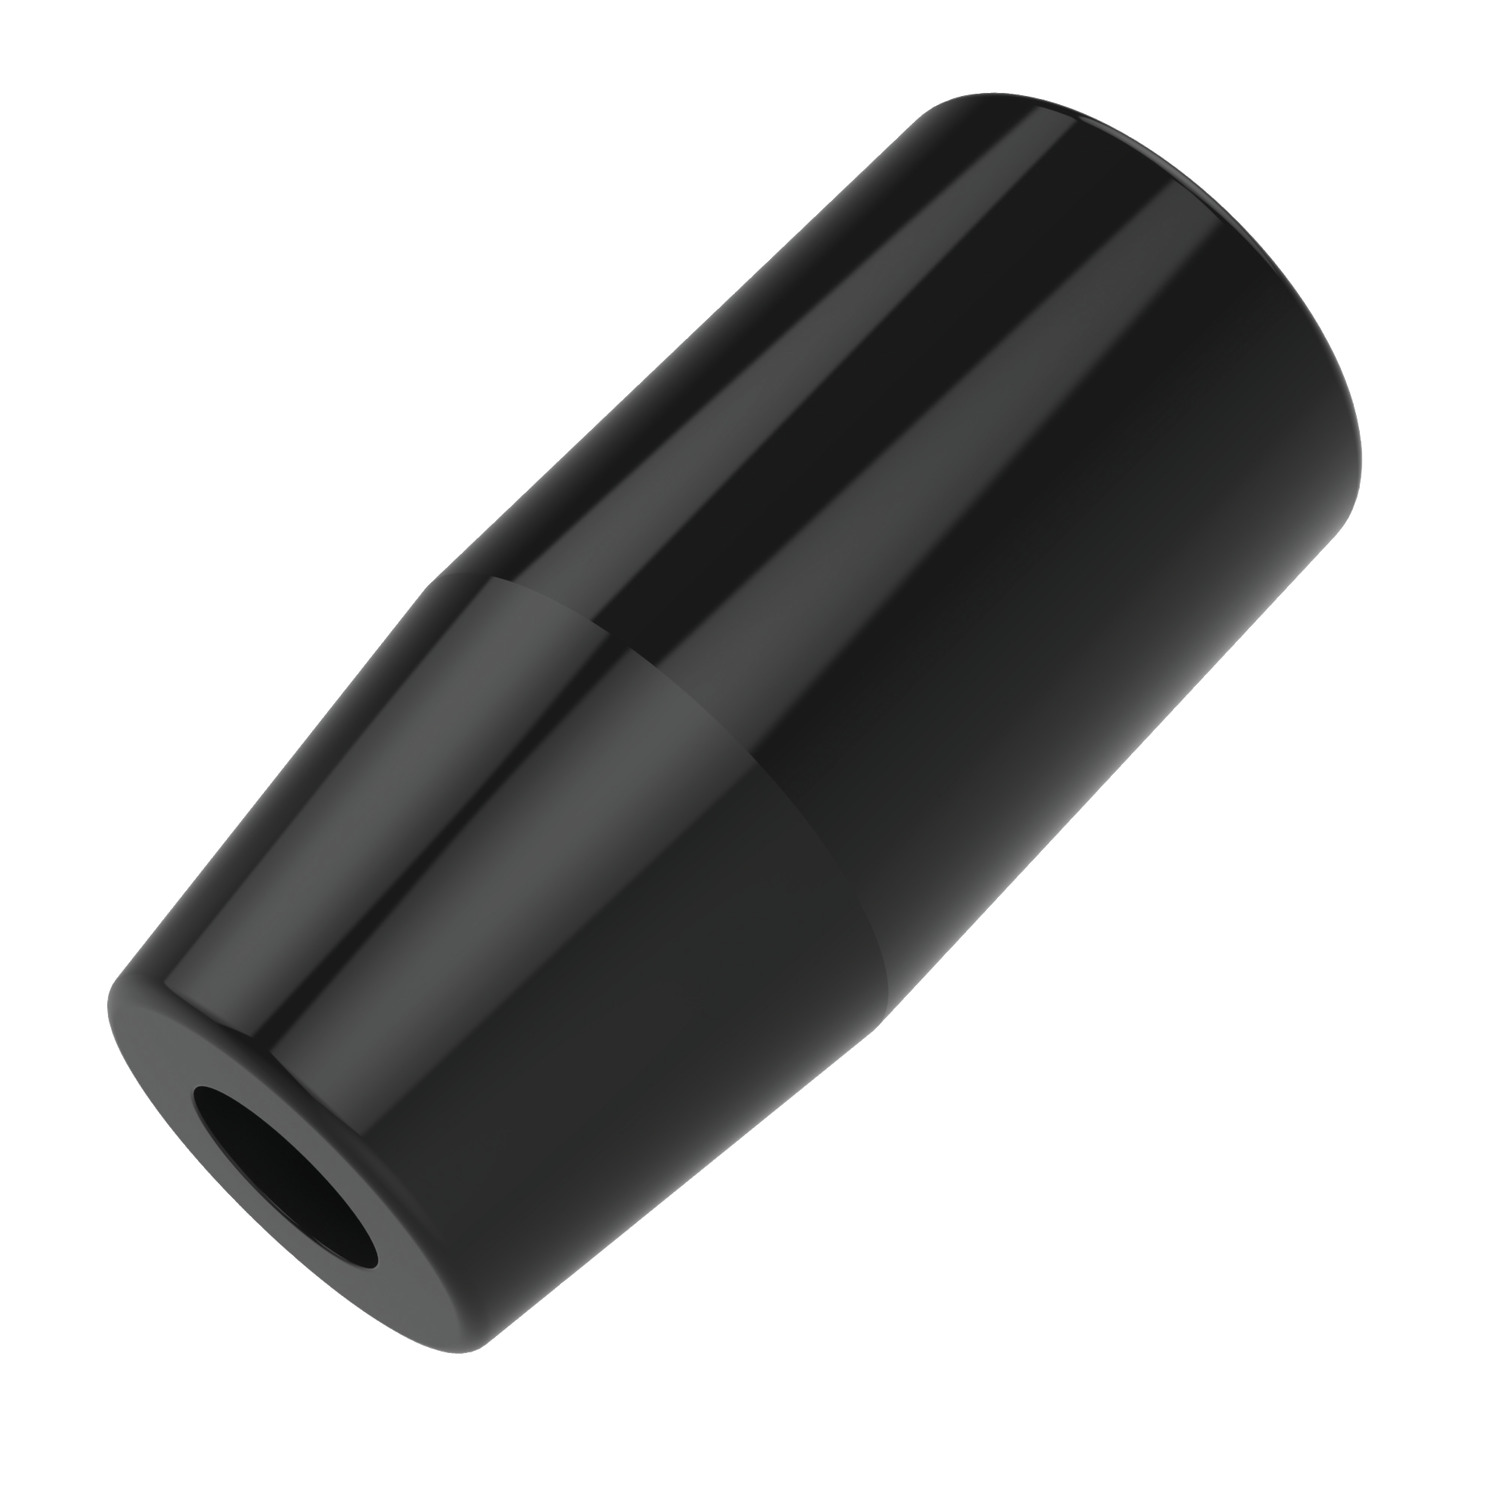 Cylindrical Handles Self Locking Self locking cylindrical handles made from black phenolic plastic. Special sizes and colours are available on request, with a minimum order quanity